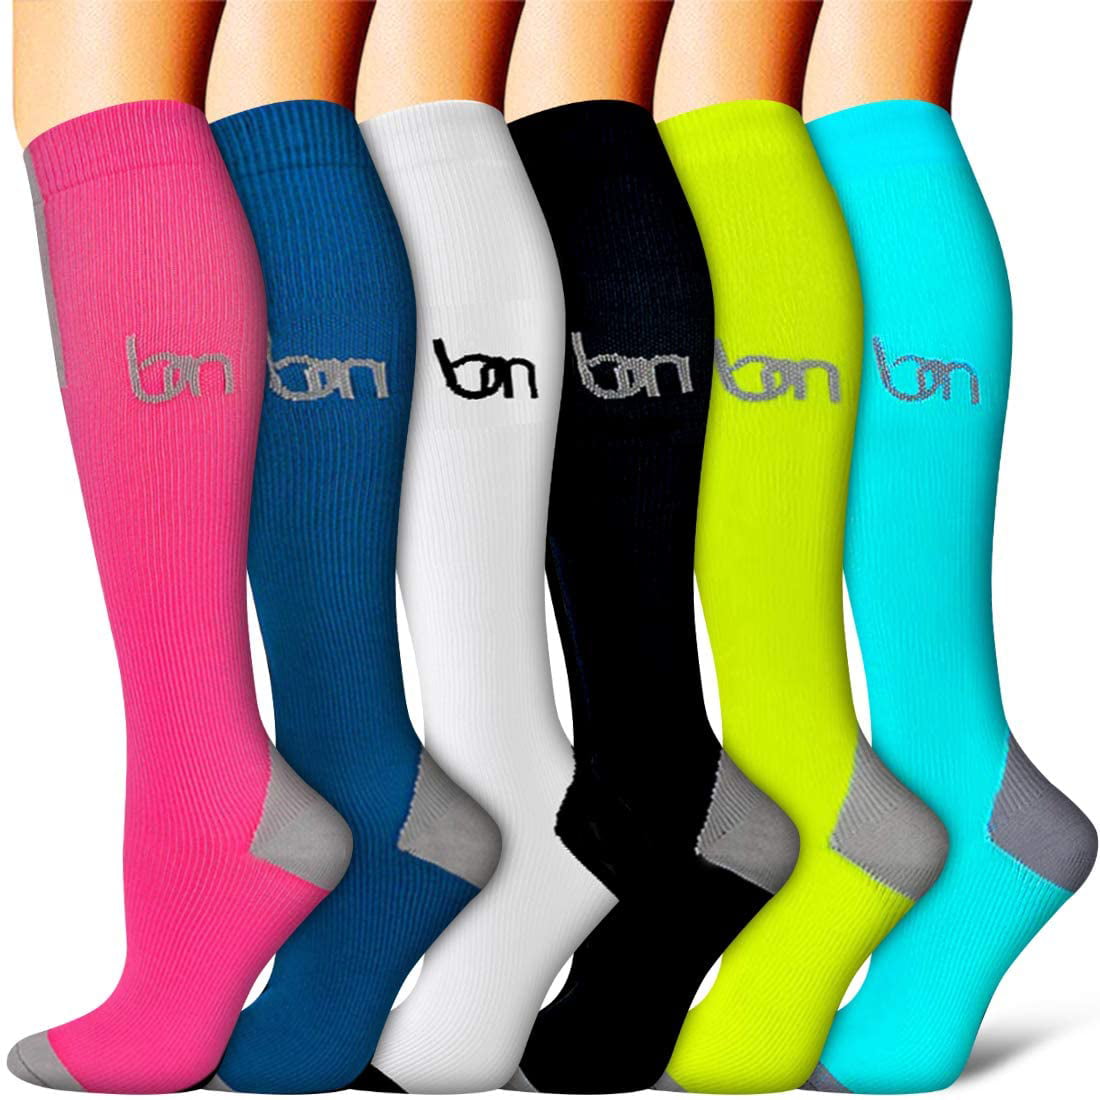 Pregnancy Copper Compression Socks Women & Men 6 Pairs - Best for Running,Medical,Athletic Sports,Flight Travel 